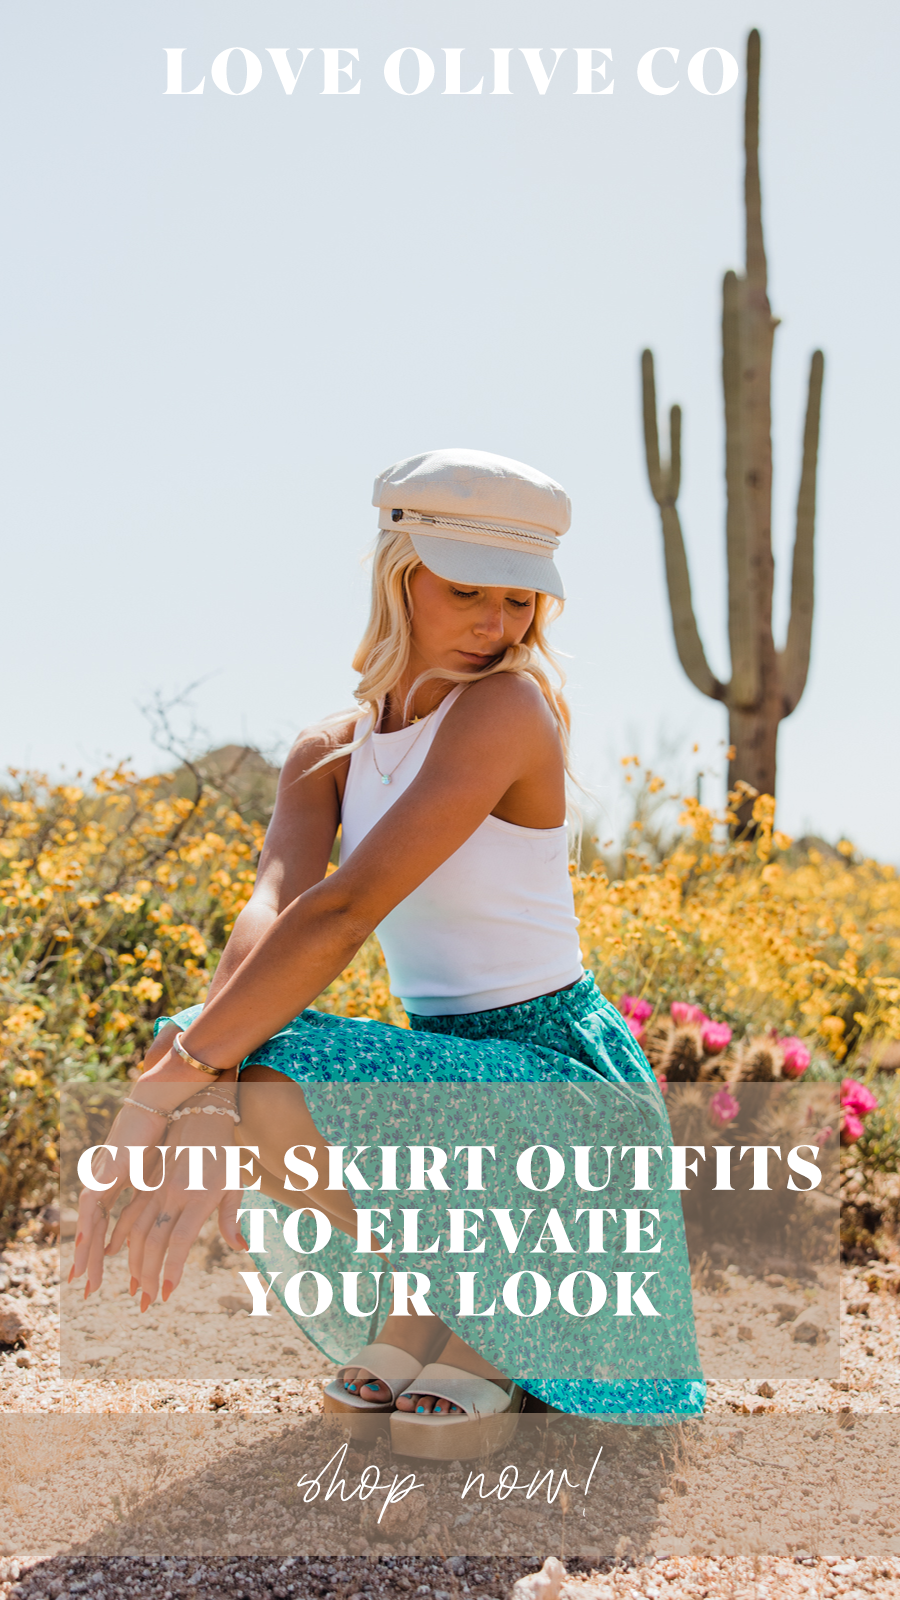 Cute Skirt Outfits to Elevate Your Look